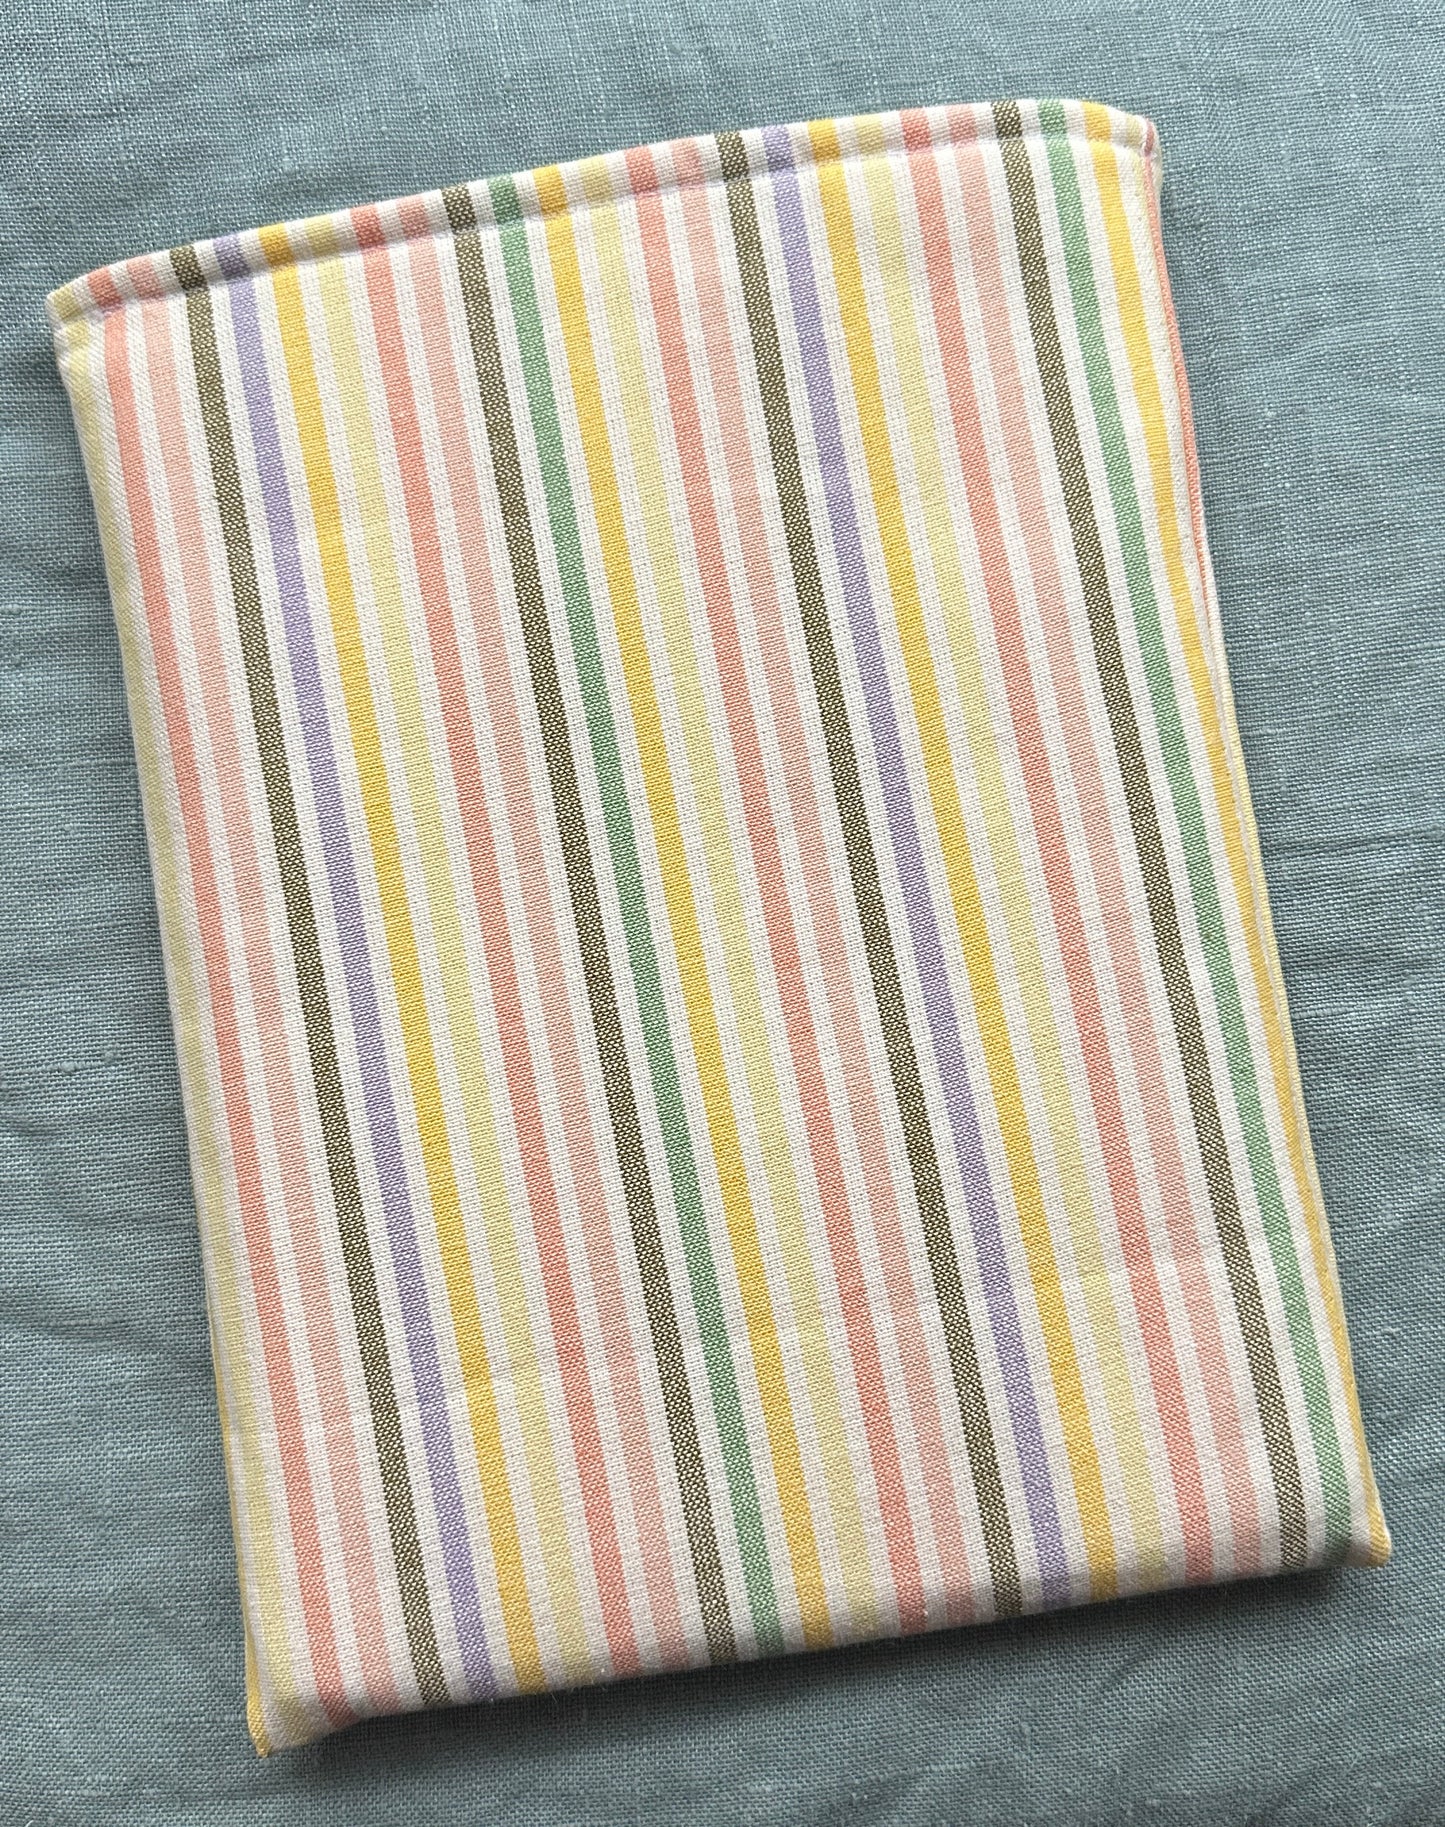 Book Sleeve - fits 20x25 cm planners and books